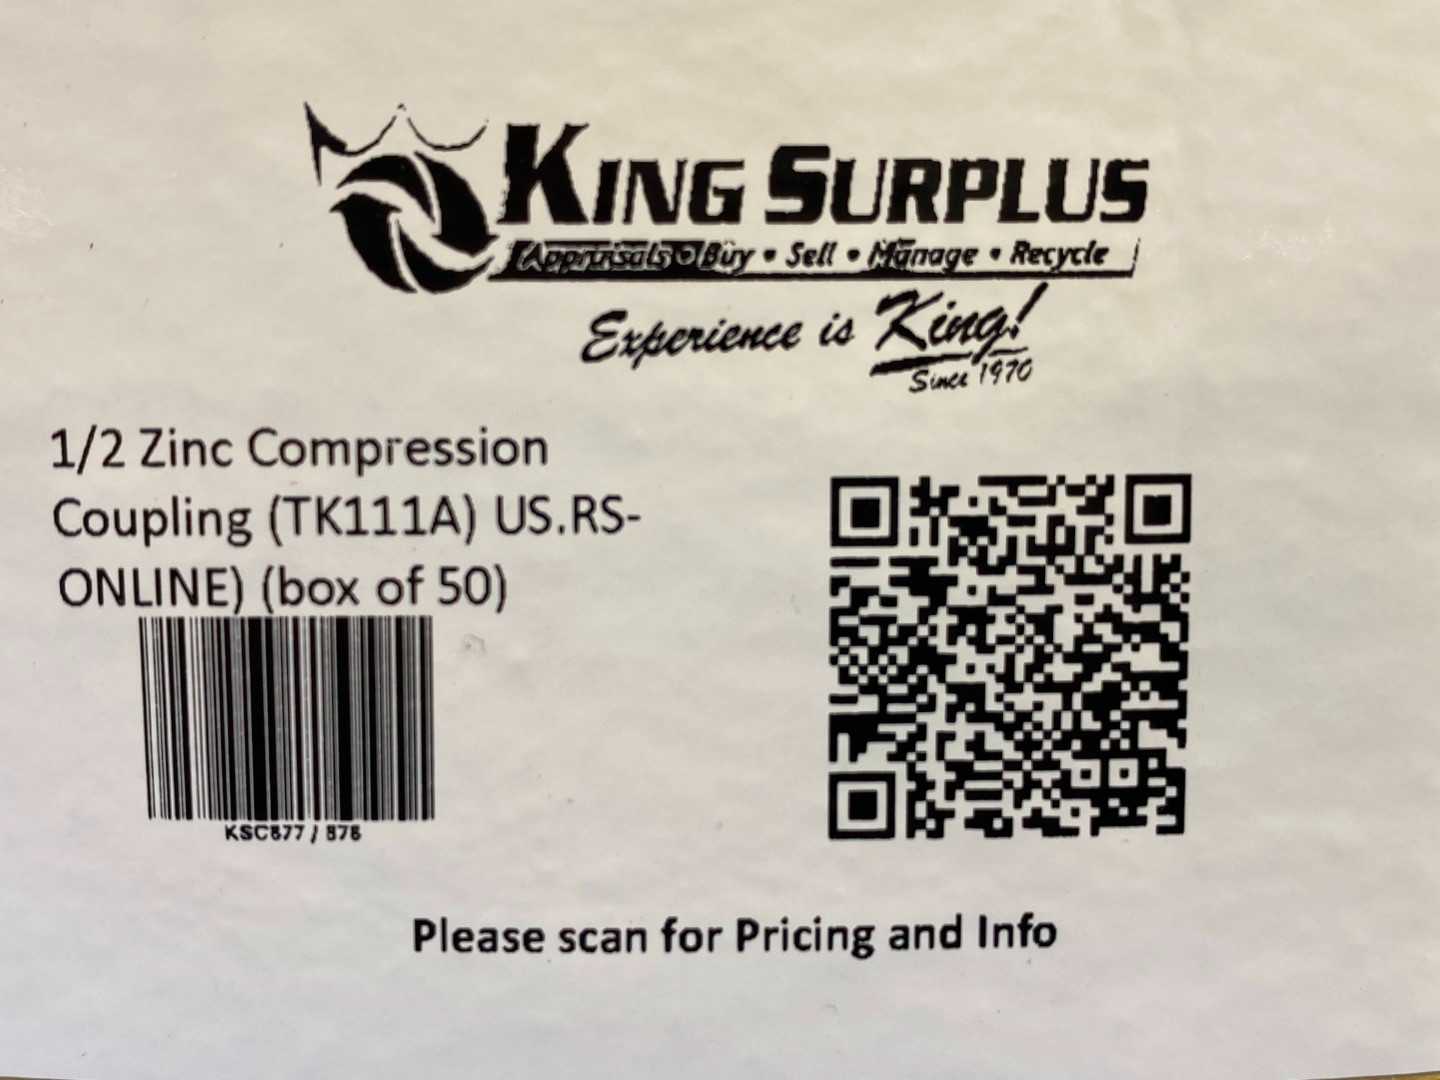 1/2" Thomas & Betts Compression Coupling (TK111A) US.RS-ONLINE) (box of 50)